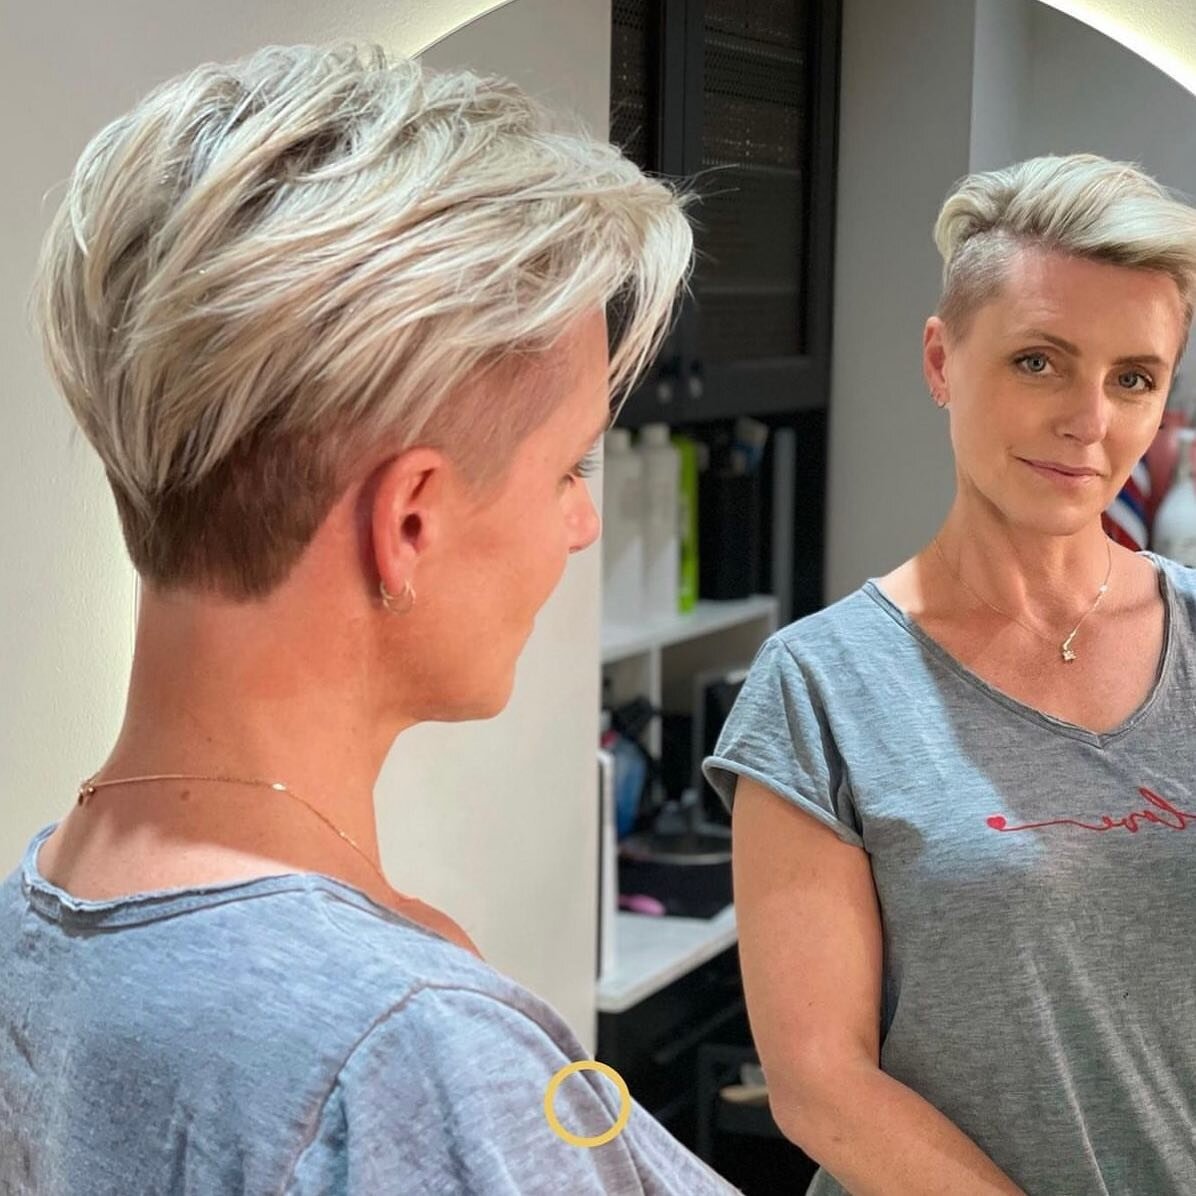 Still a favourite look that I&rsquo;ve created!

Ladies, do you have the confidence to pull off an undercut? 

#globecreative #newstead #hairstylist #hairstylistbrisbane #haircolouristbrisbane #hairstyleideas #haircolourideas #haircaretips #haircut #